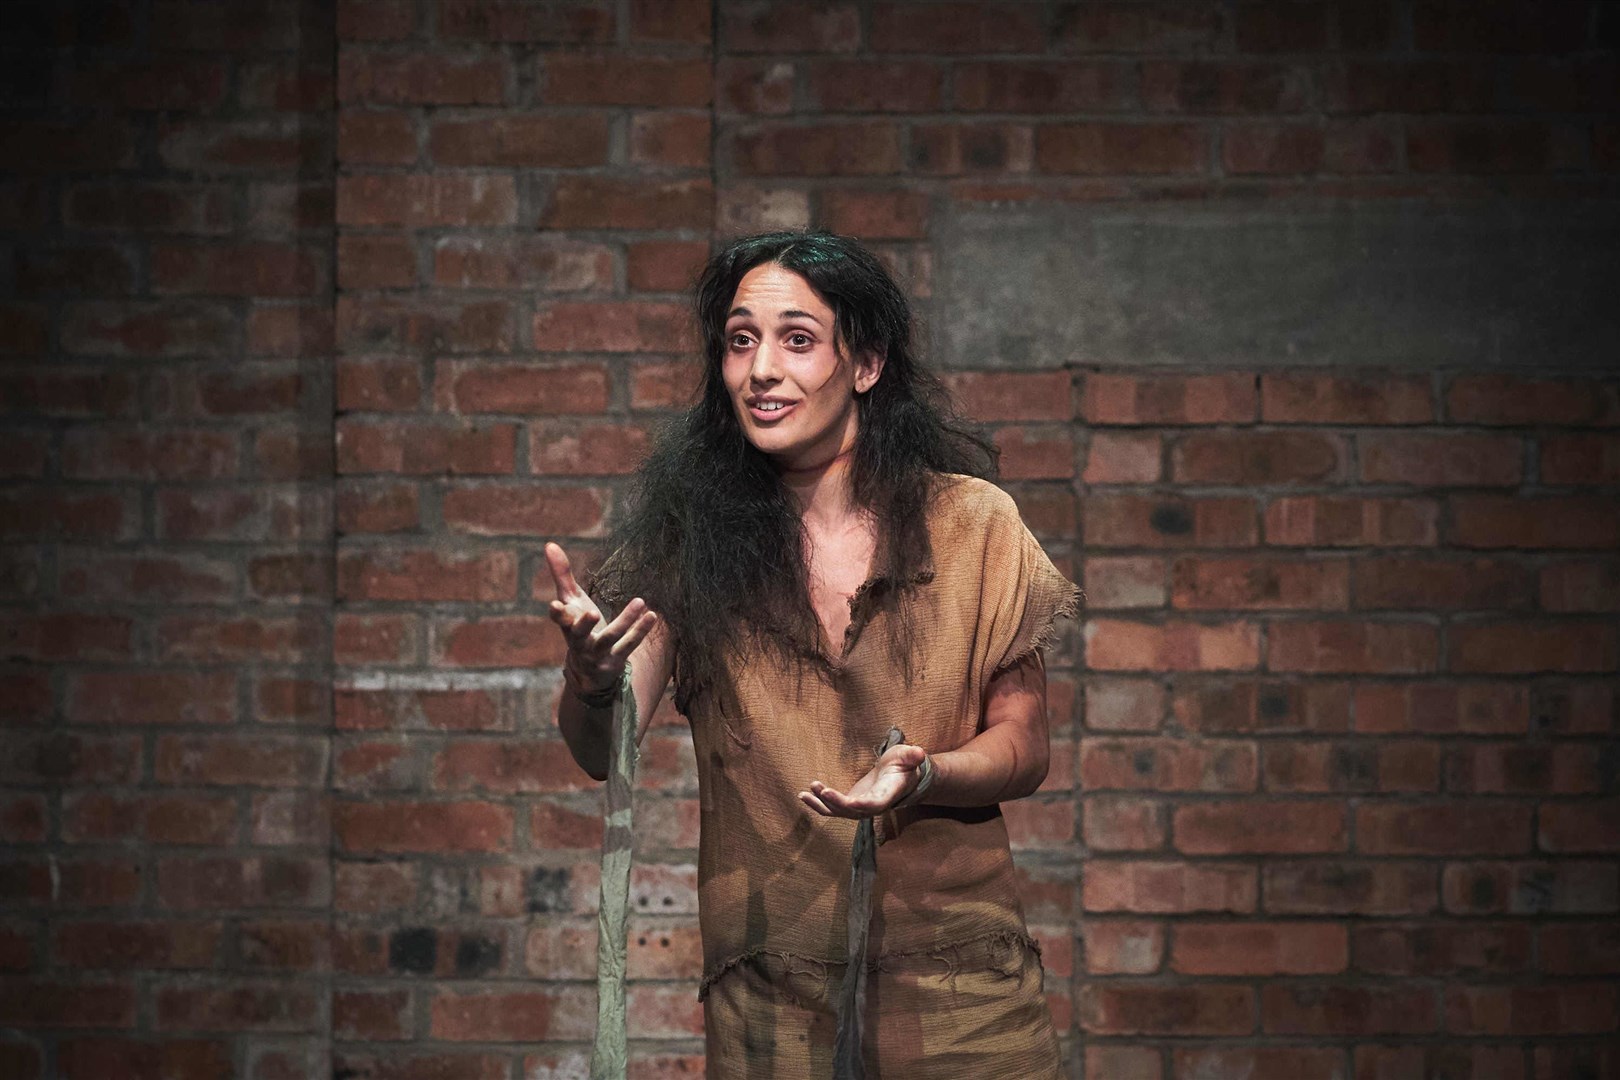 Maggie Wall is a one-woman show with actress Blythe Jandoo.